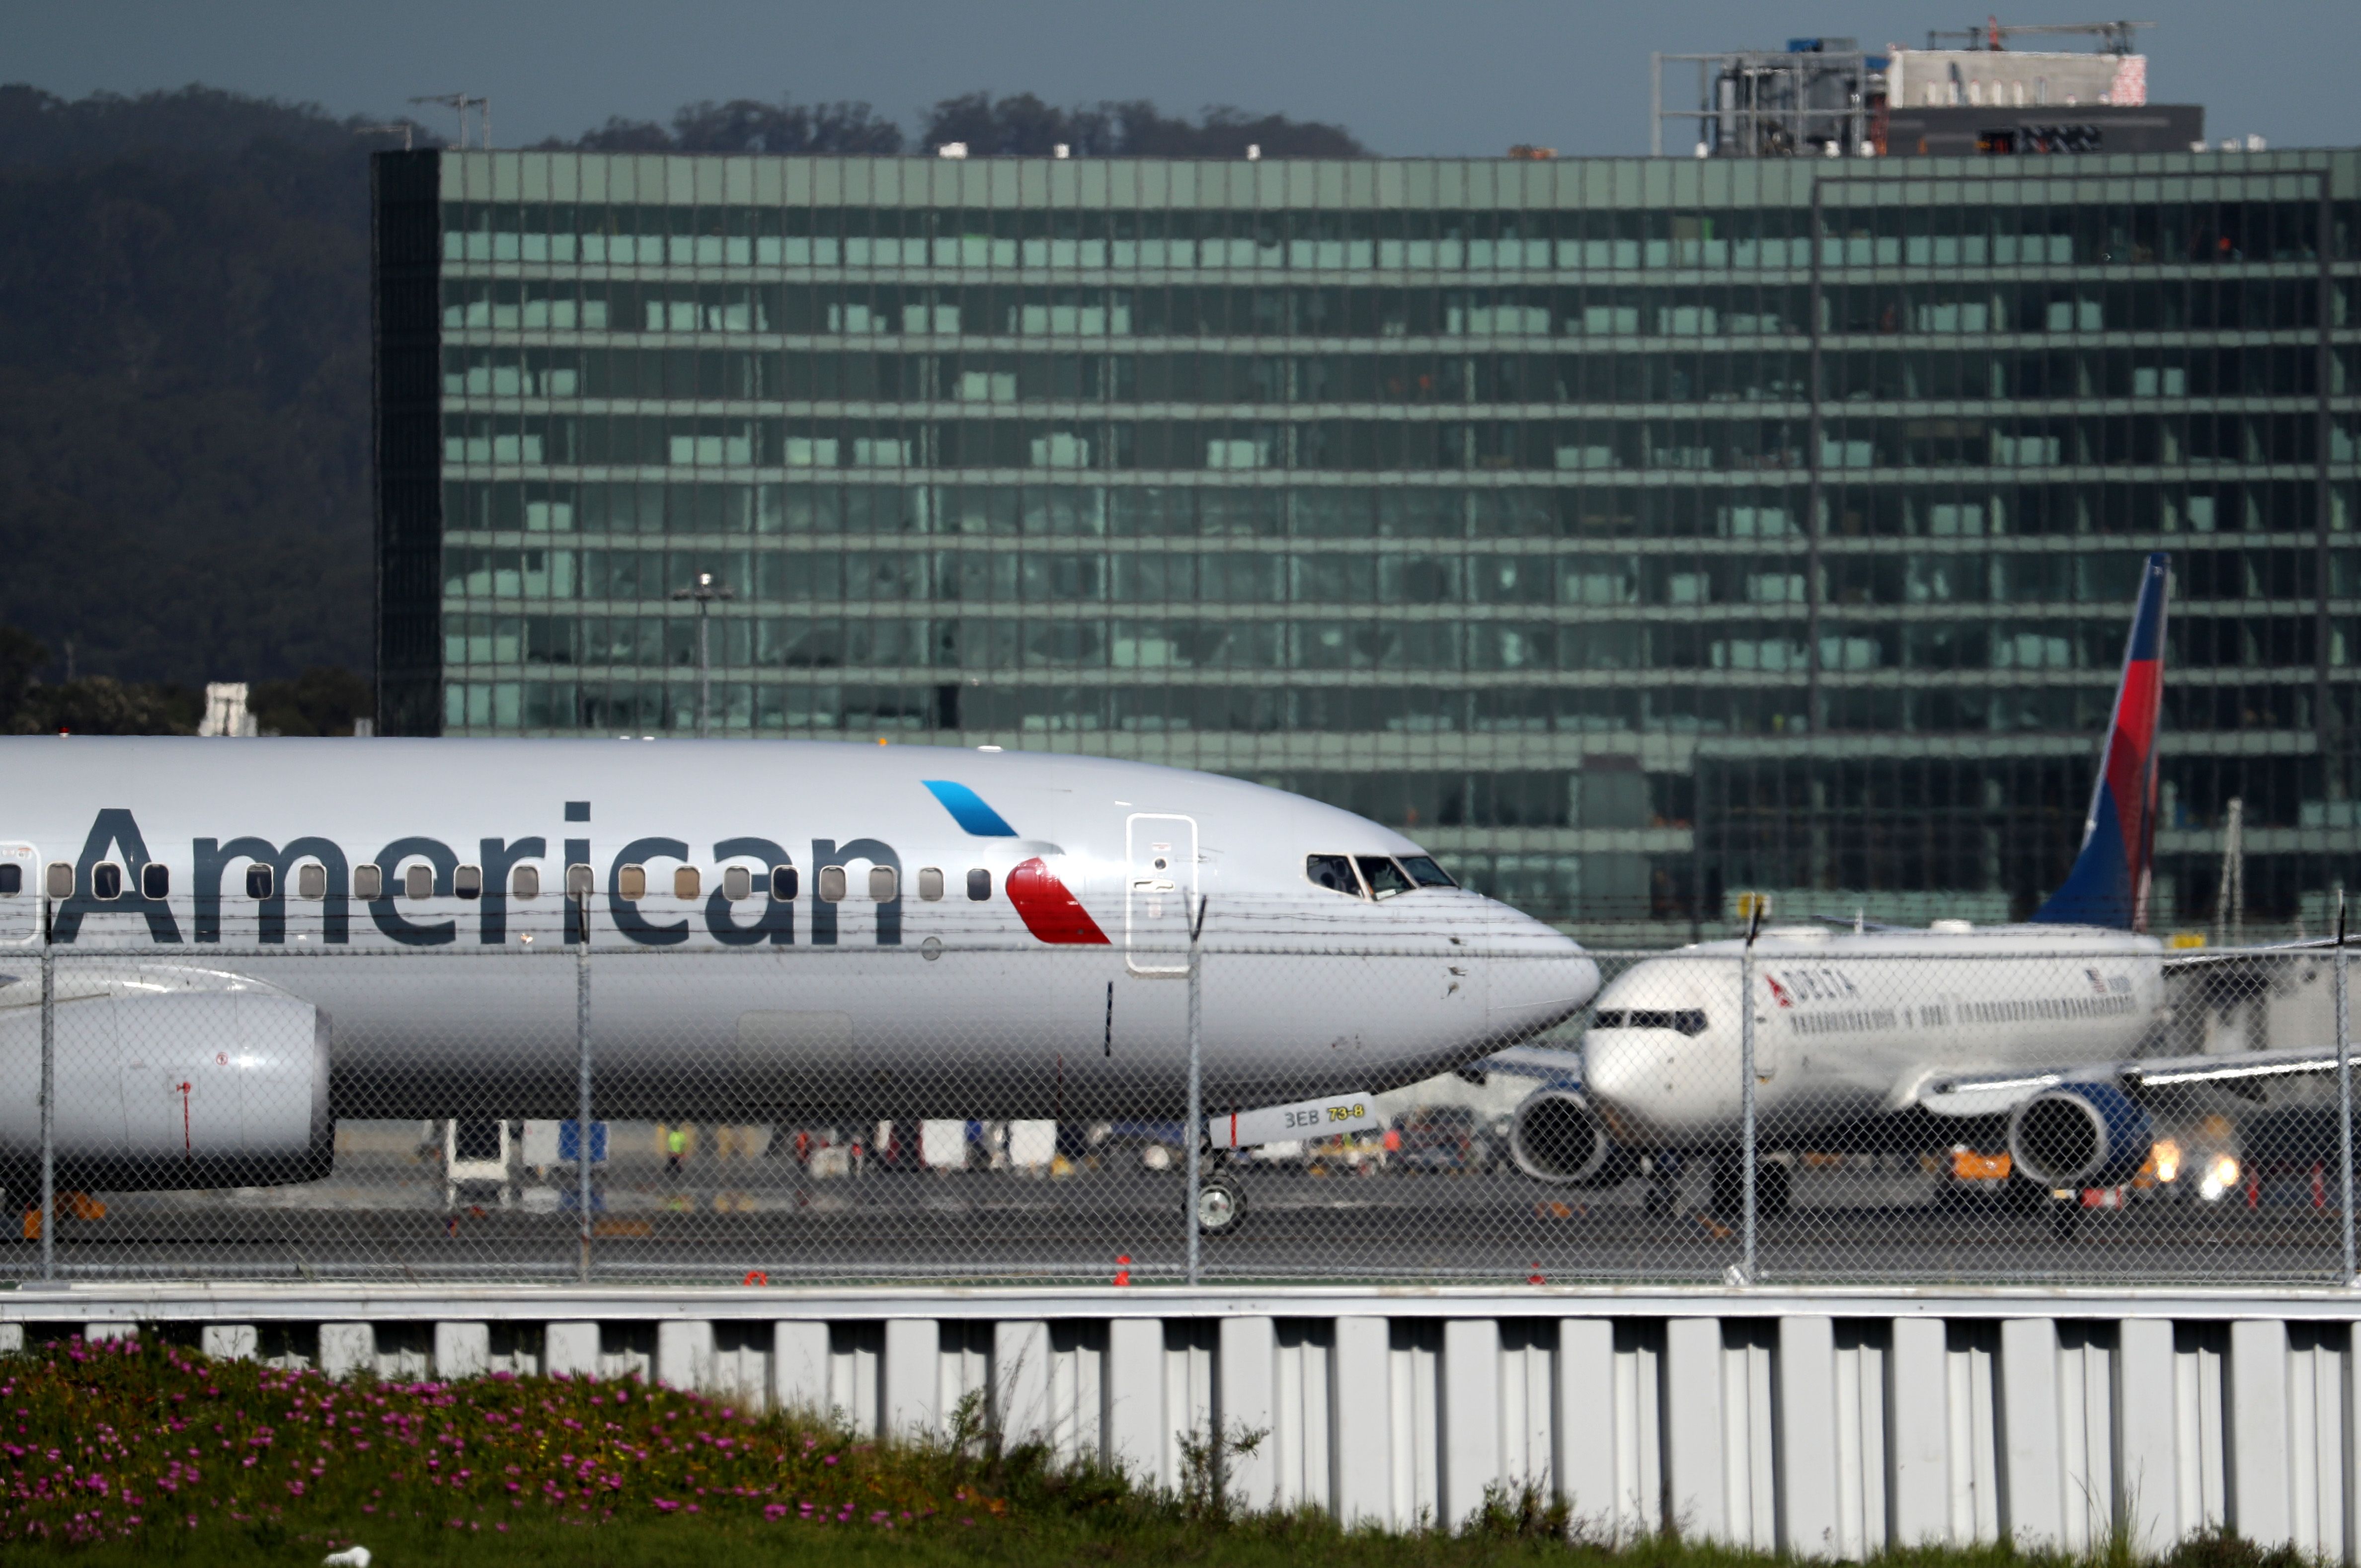 simpleflying.com - Justin Hayward - American Airlines AAdvantage: What Are The Hidden Perks?